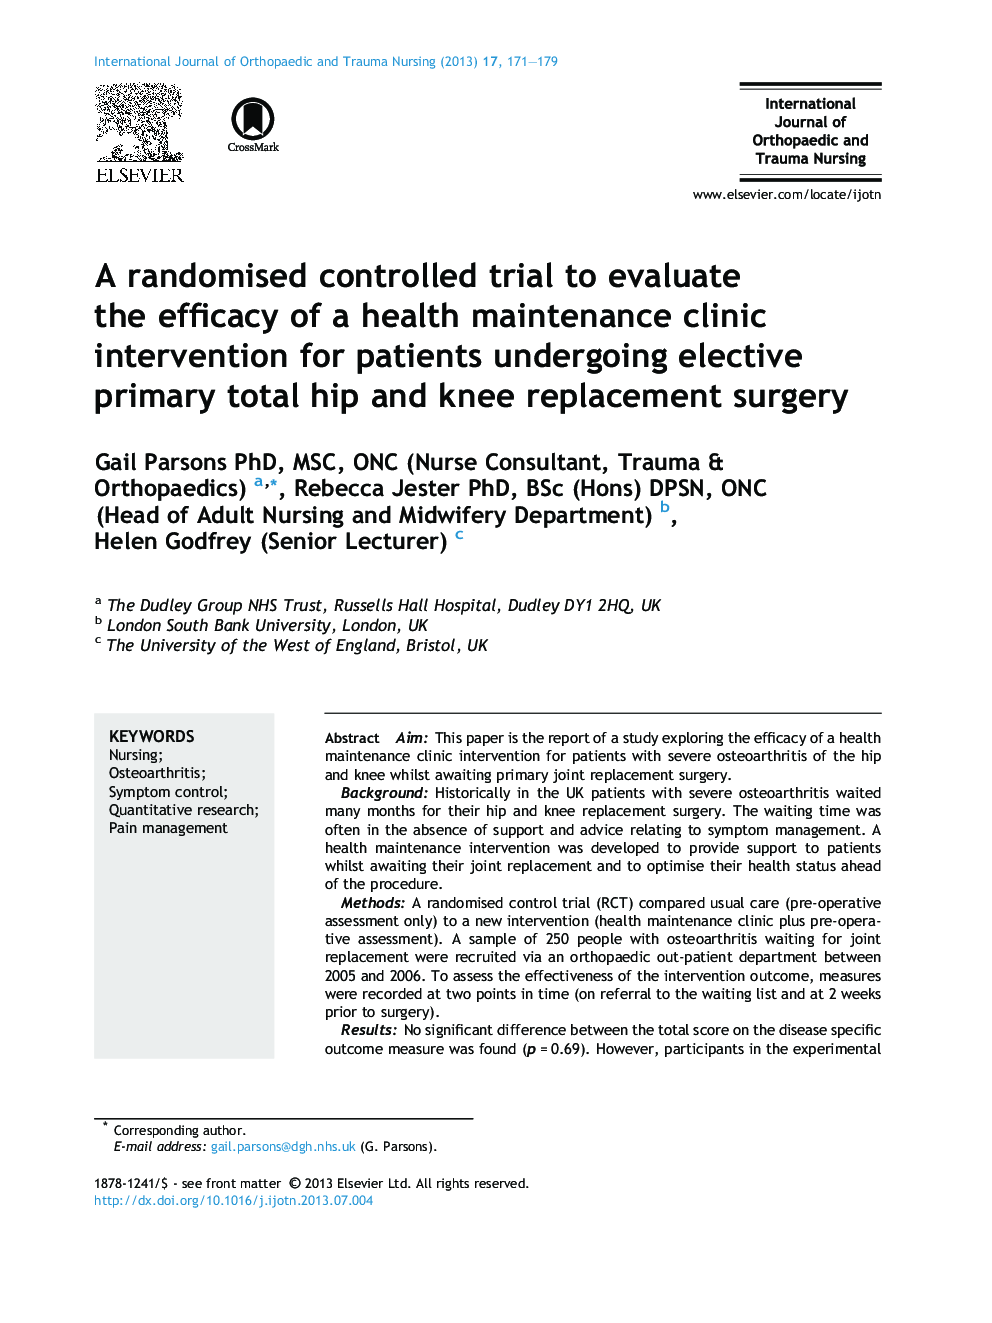 A randomised controlled trial to evaluate the efficacy of a health maintenance clinic intervention for patients undergoing elective primary total hip and knee replacement surgery